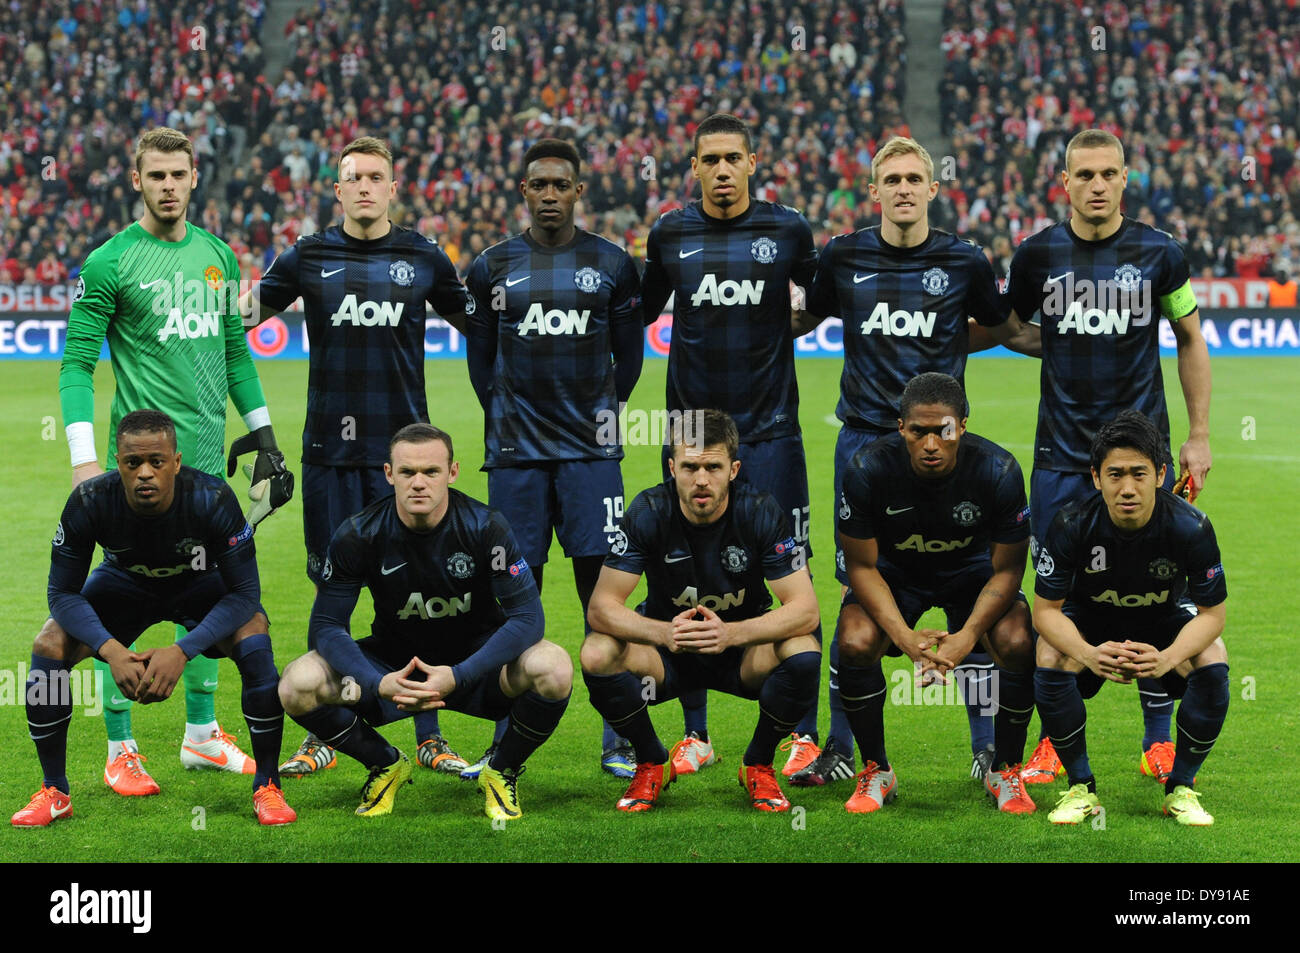 Munich, Germany. 09th Apr, 2014. Manchester's team with goal keeper David de Gea (BACK, L-R), Phil Jones, Danny Welbeck, Chris Smalling, Darren Fletcher, and Nemanja Vidic, (FRONT, L-R) Patrice Evra, Wayne Rooney, Michael Carrick, Antonio Valencia and Shinji Kagawa is pictured prior the Champions League quarterfinal between FC Bayern Munich and Manchester United at the arena in Munich, Germany, 09 April 2014. Munich won the match 3-1. Photo: Andreas Gebert/dpa/Alamy Live News Stock Photo